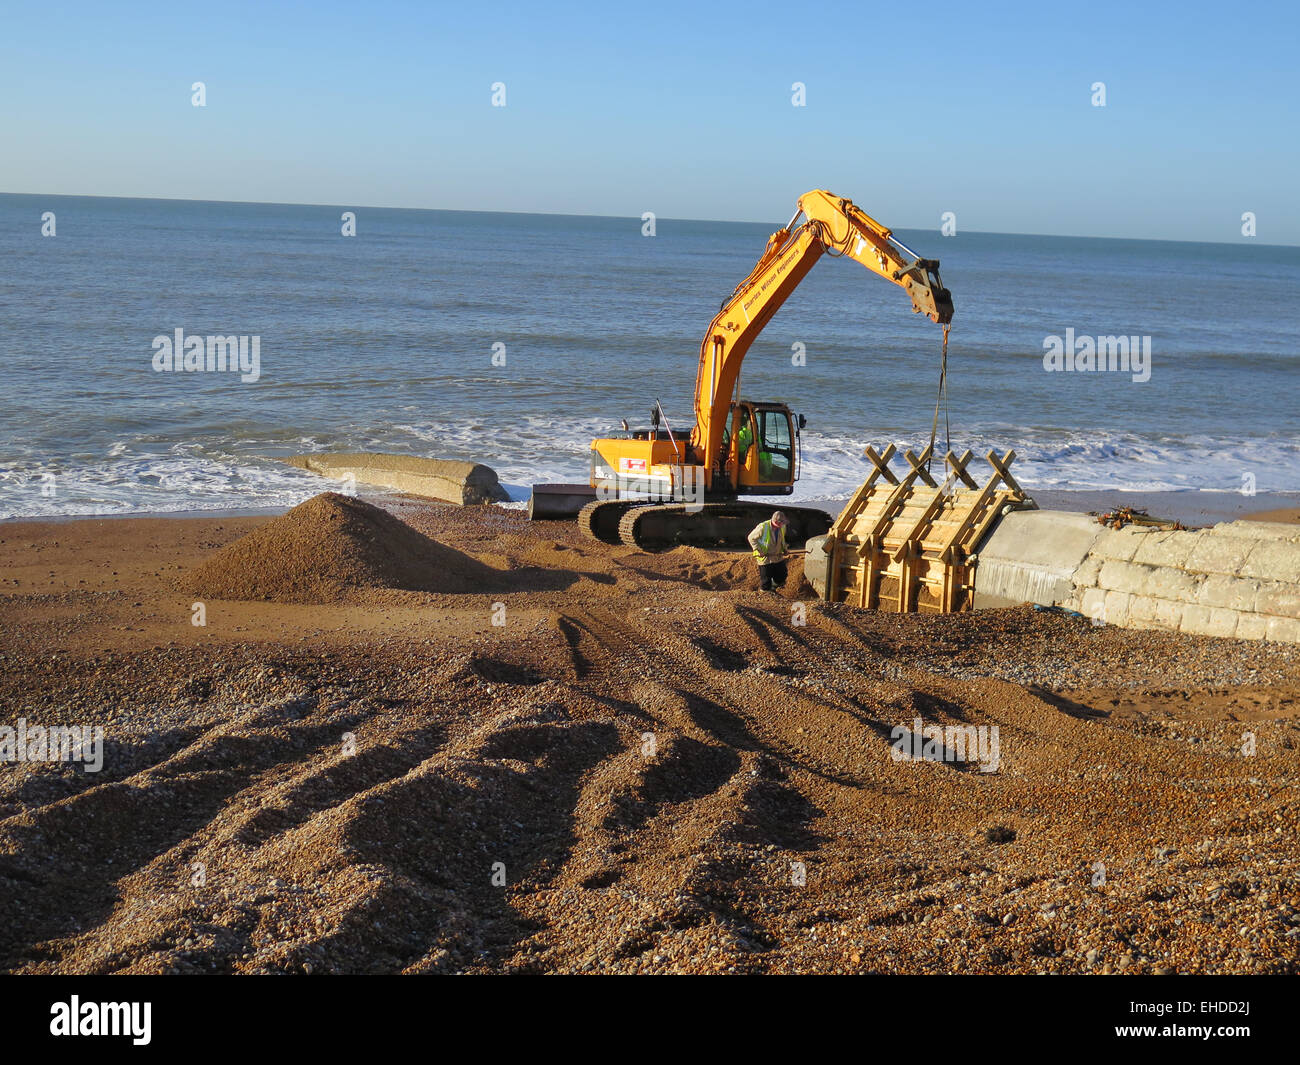 A Caterpillar Digger with Thorne Civil Engineering workers preparing to remove wooden moulding from new concrete Groynes being built on Hove beach, East Sussex. Stock Photo